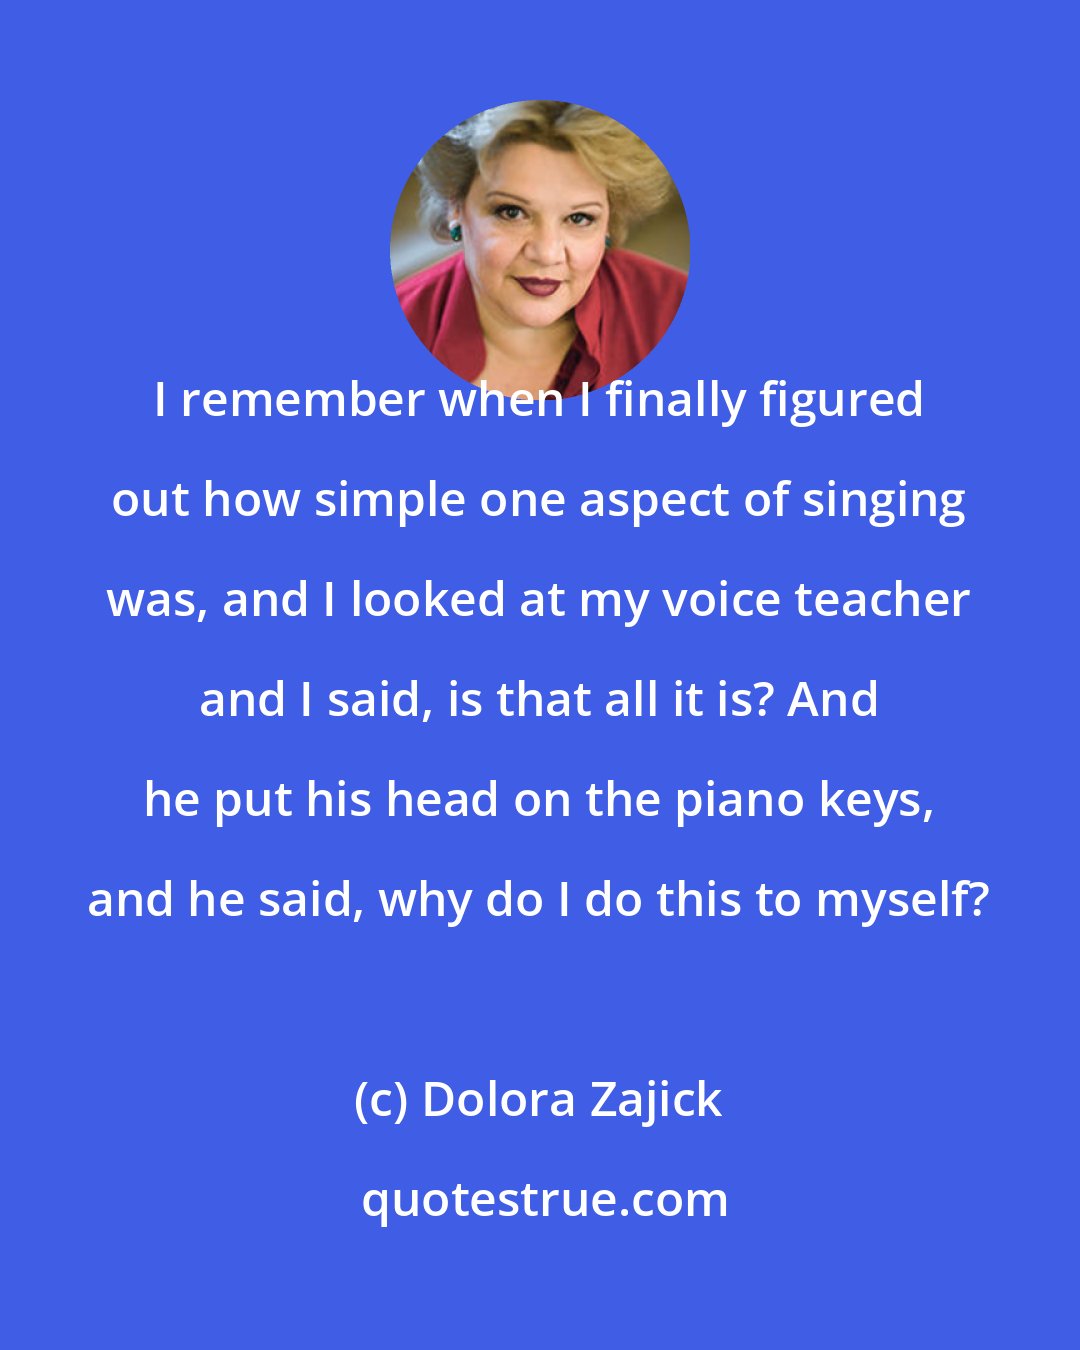 Dolora Zajick: I remember when I finally figured out how simple one aspect of singing was, and I looked at my voice teacher and I said, is that all it is? And he put his head on the piano keys, and he said, why do I do this to myself?